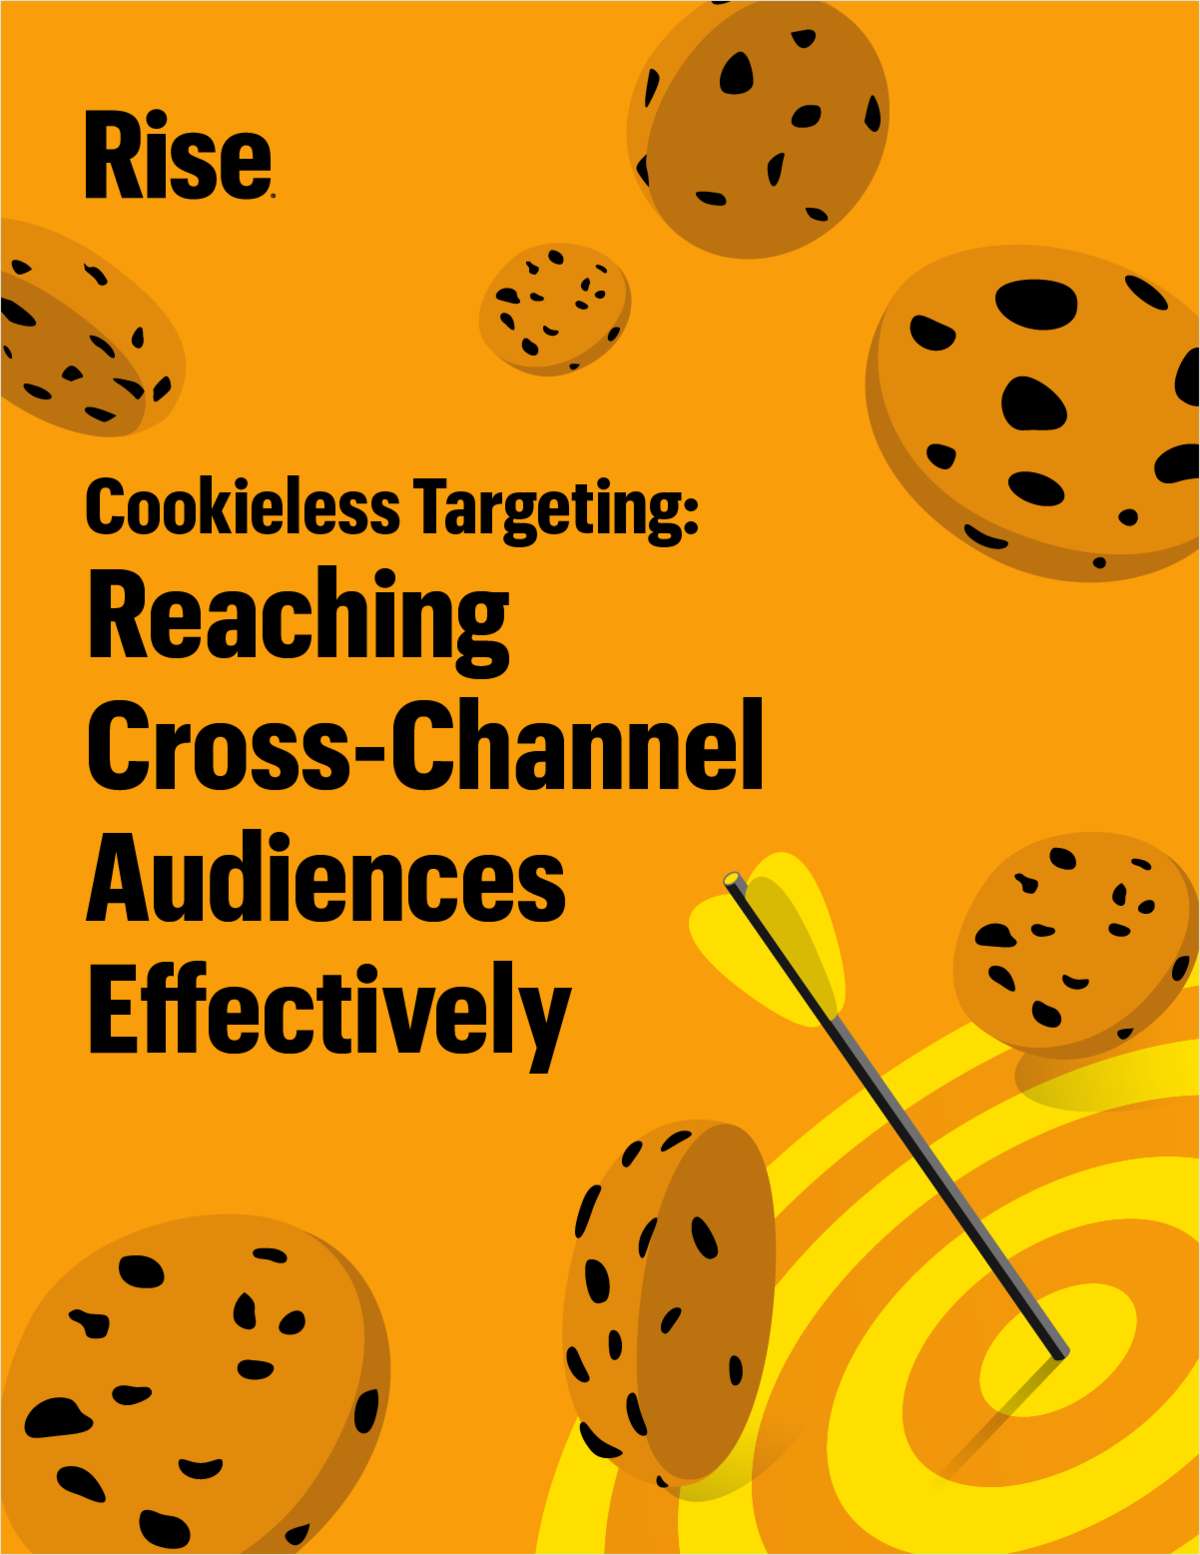 Cookieless Targeting: Reaching Cross-Channel Audiences Effectively